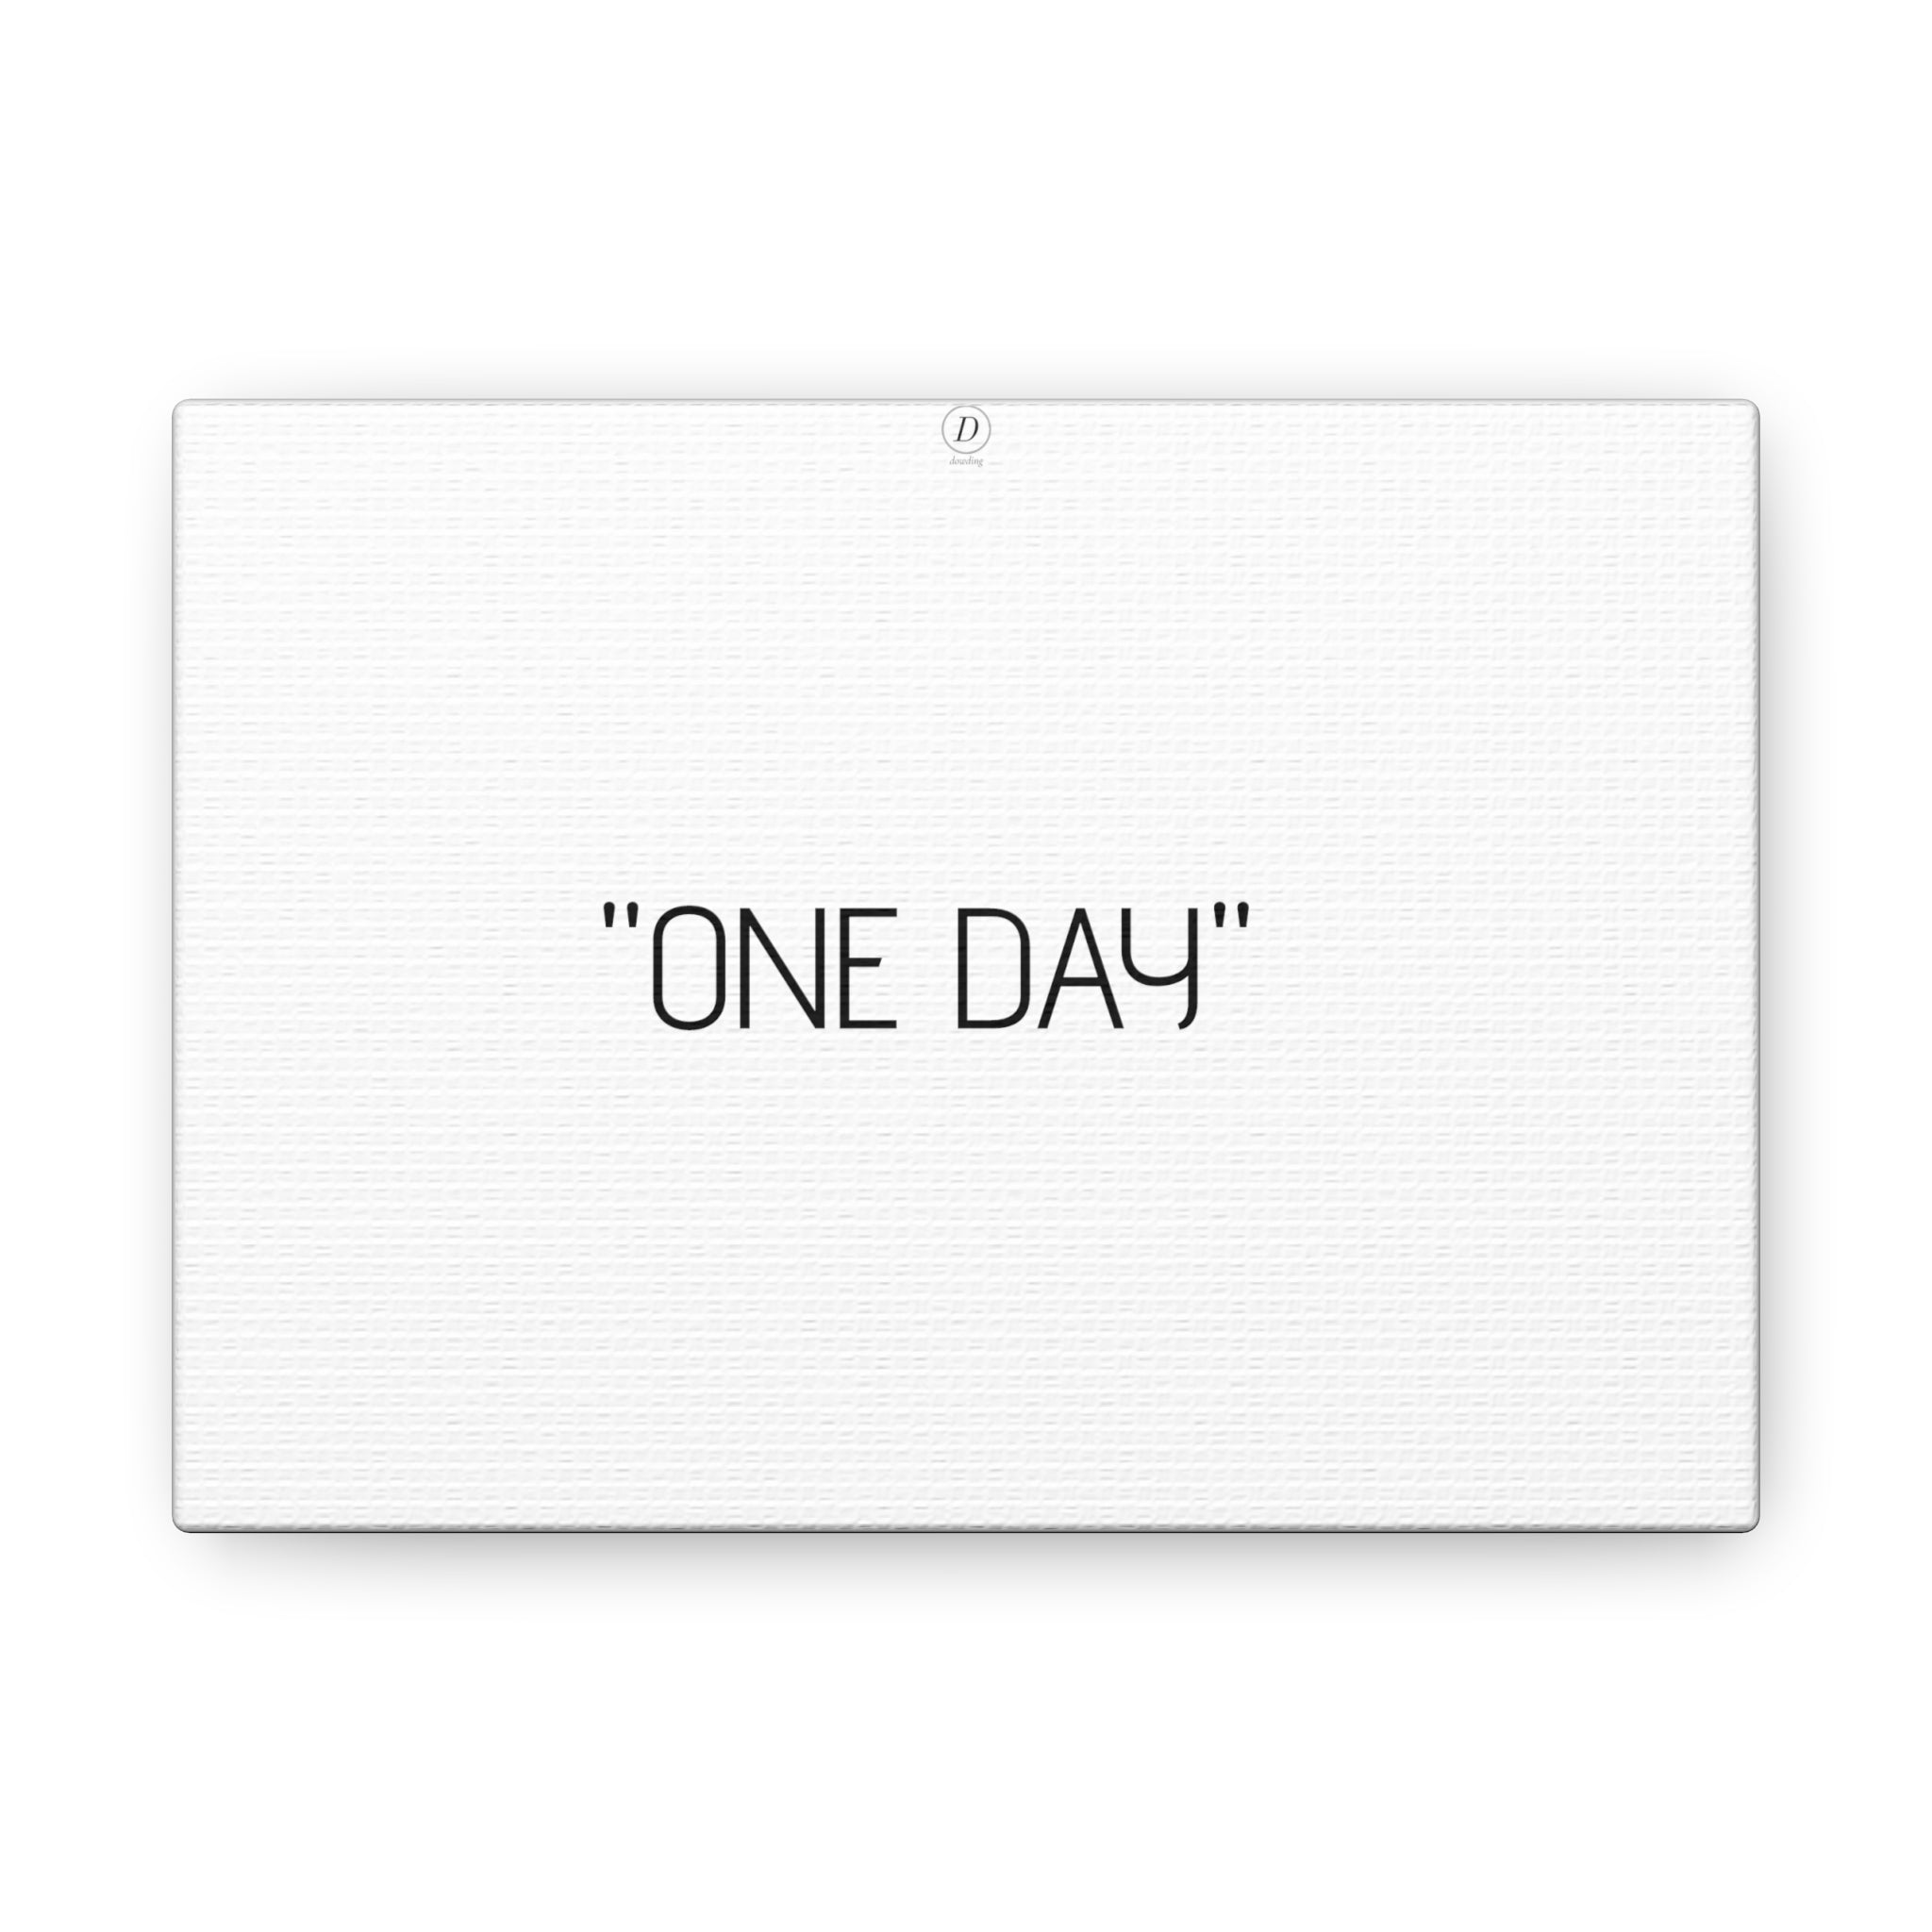 "ONE DAY" Motivational Canvas Gallery Wraps